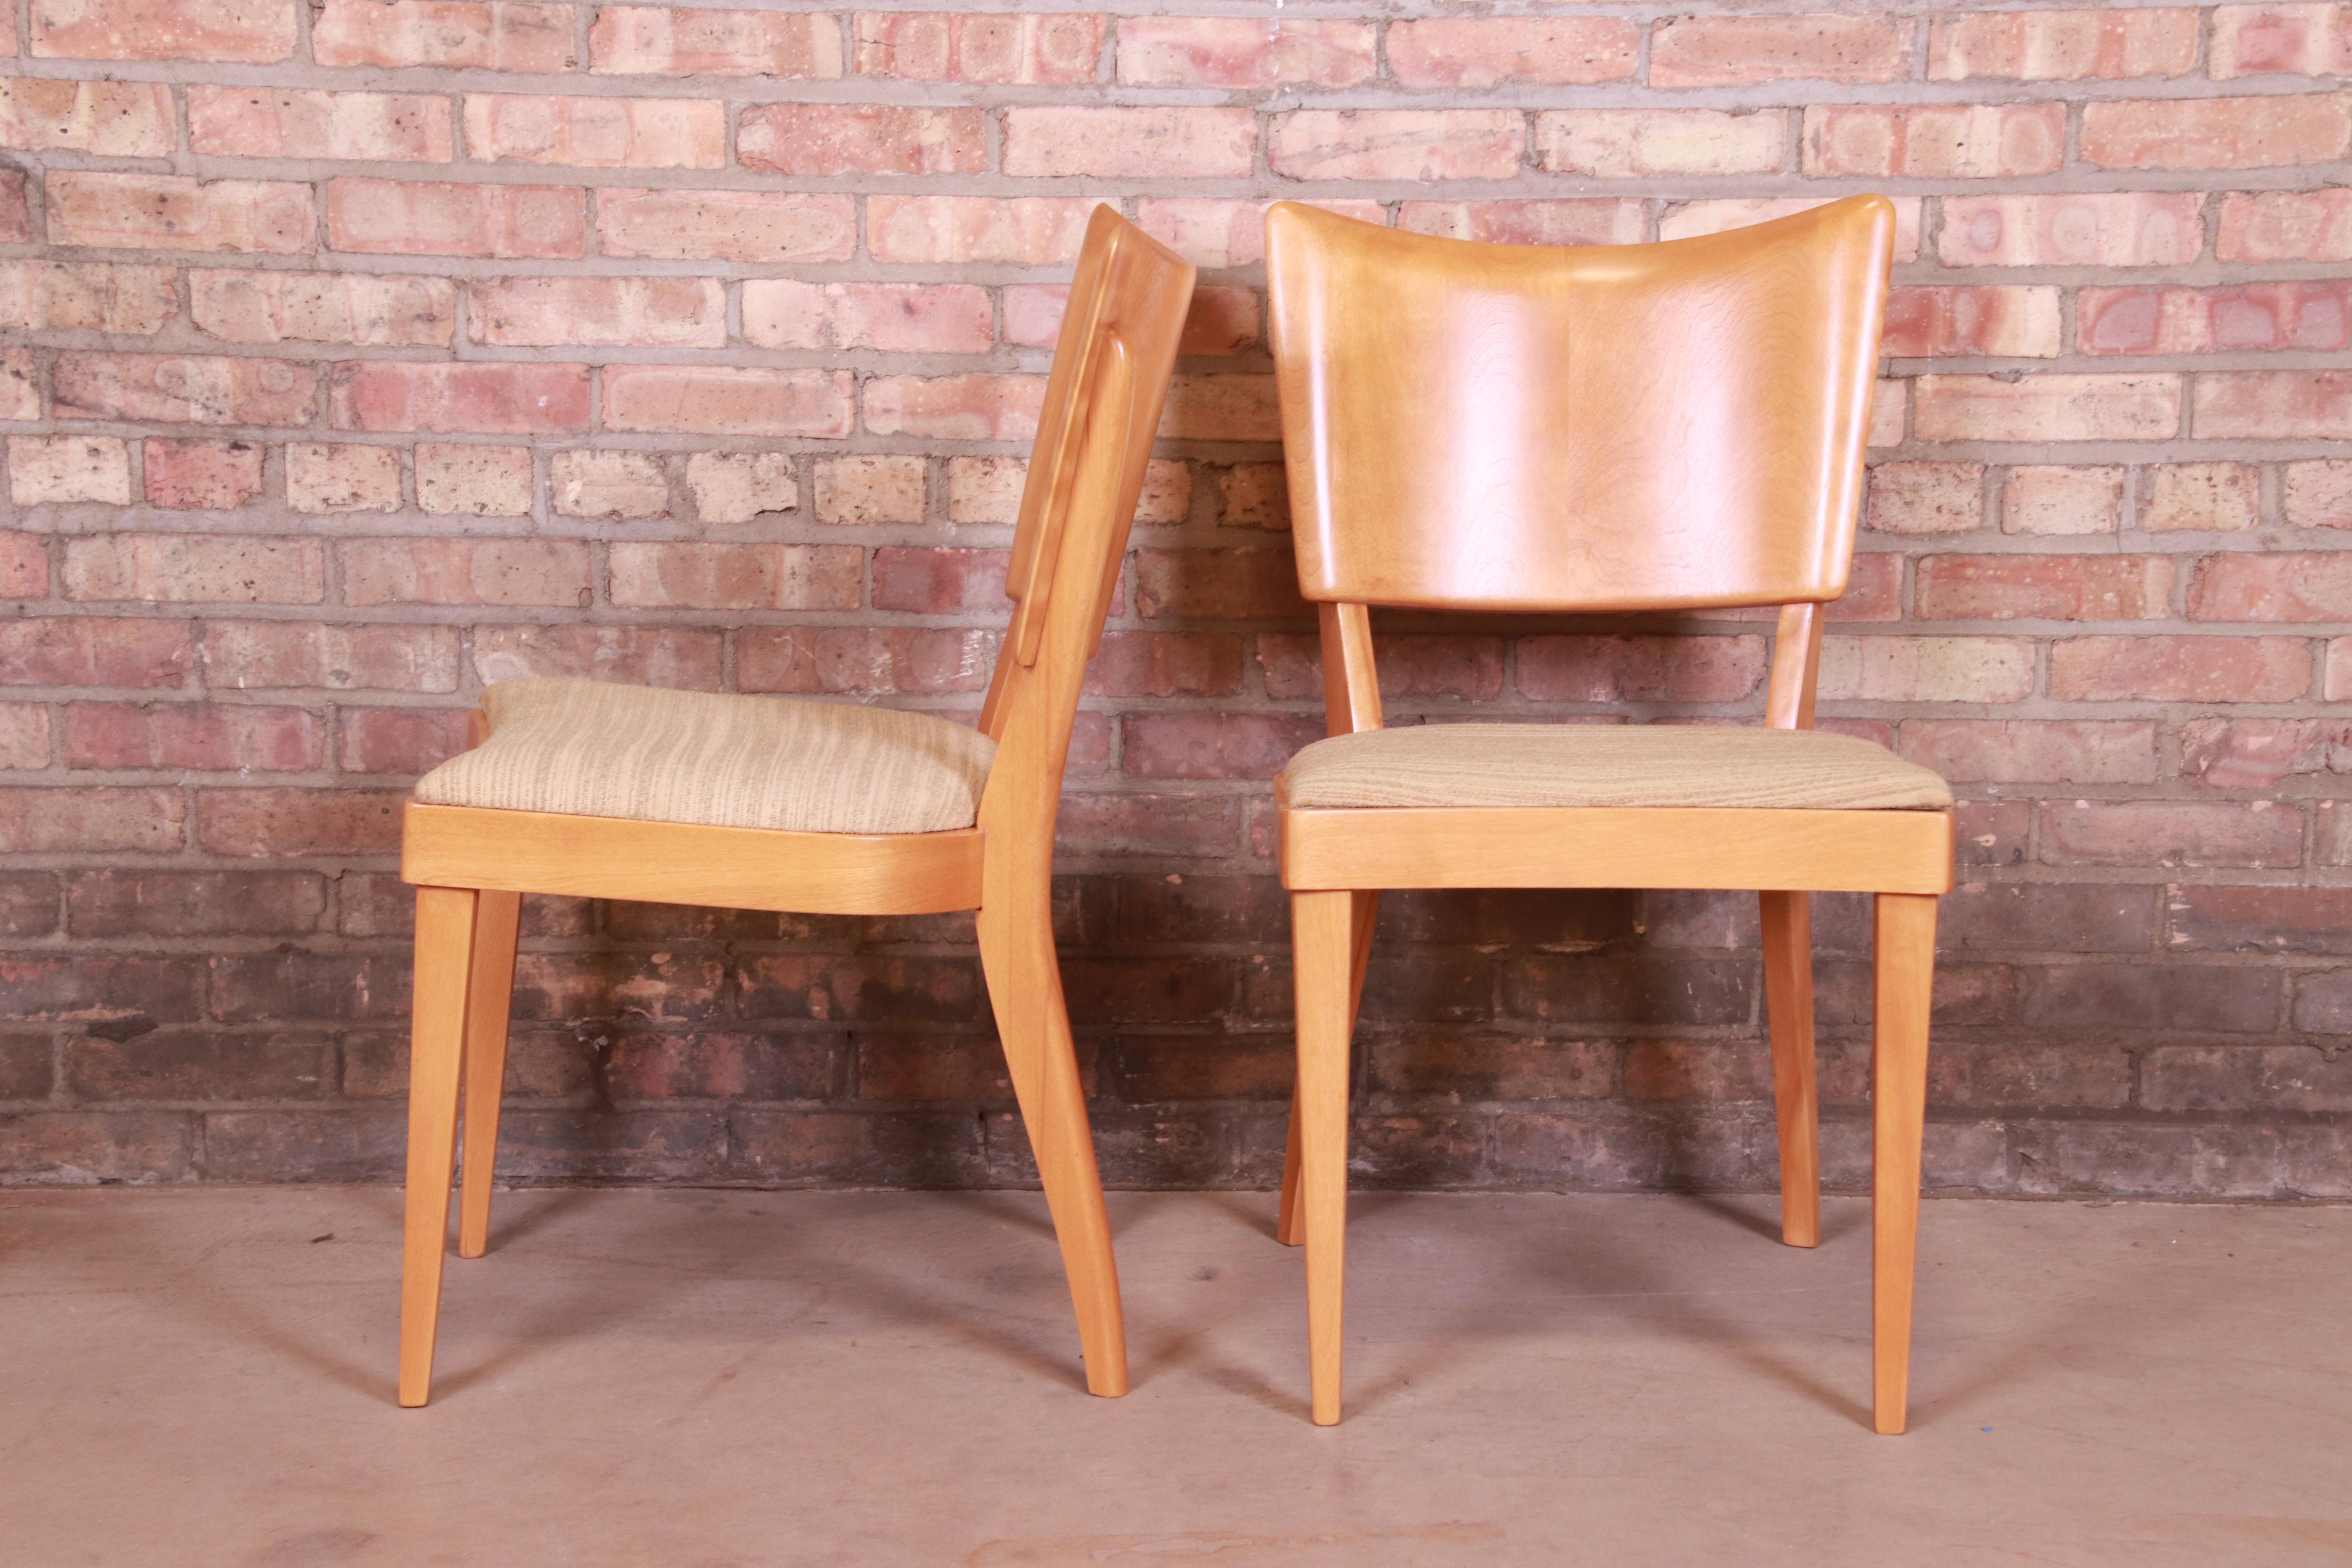 Upholstery Heywood Wakefield Mid-Century Modern Stingray Dining Chairs, Set of Four